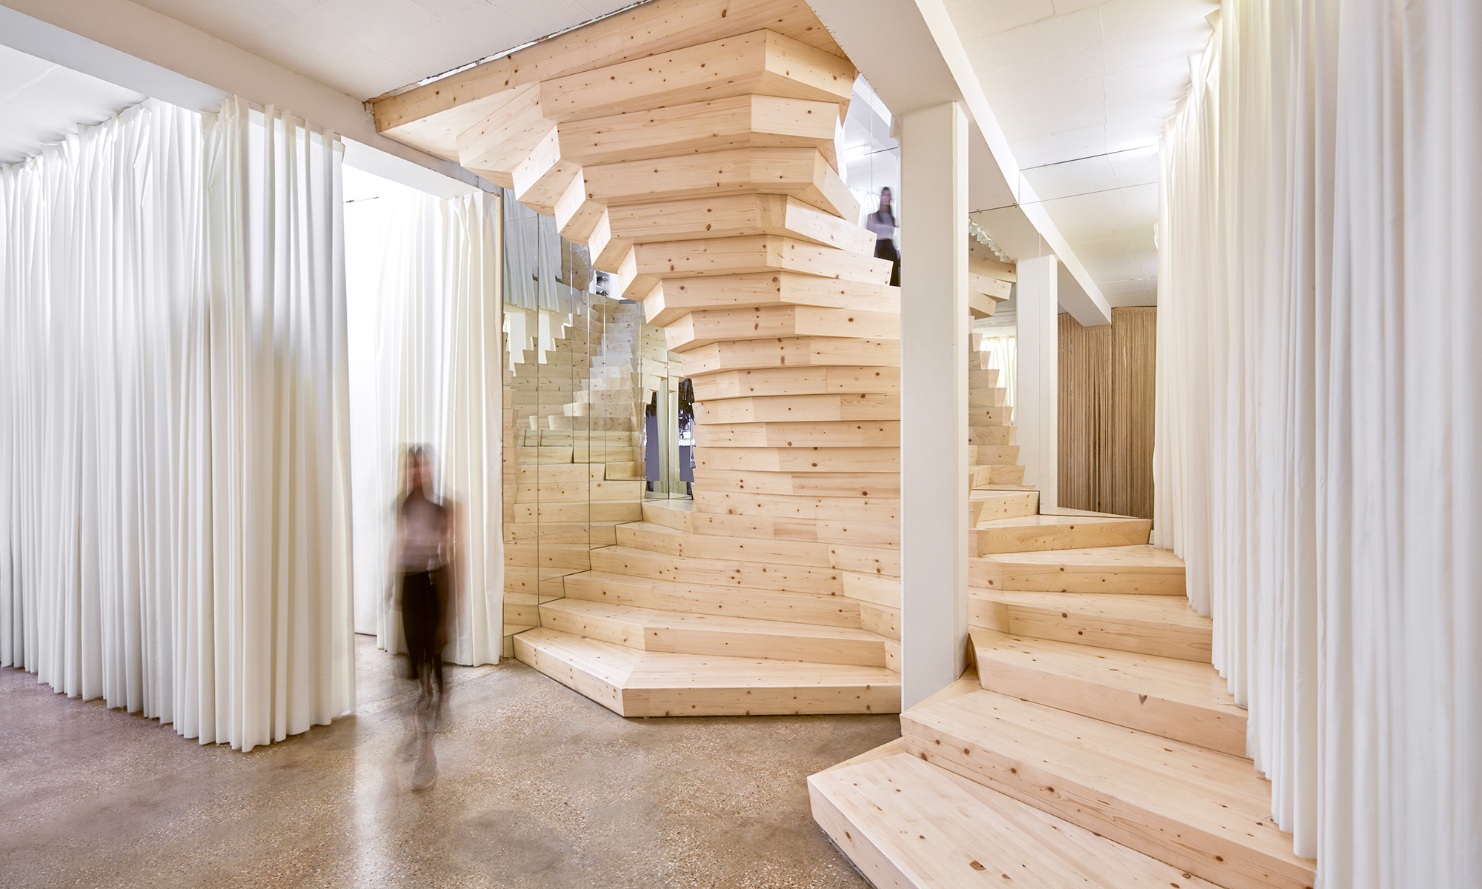 The Acme Architecture and Design offices in London feature a unique staircase.